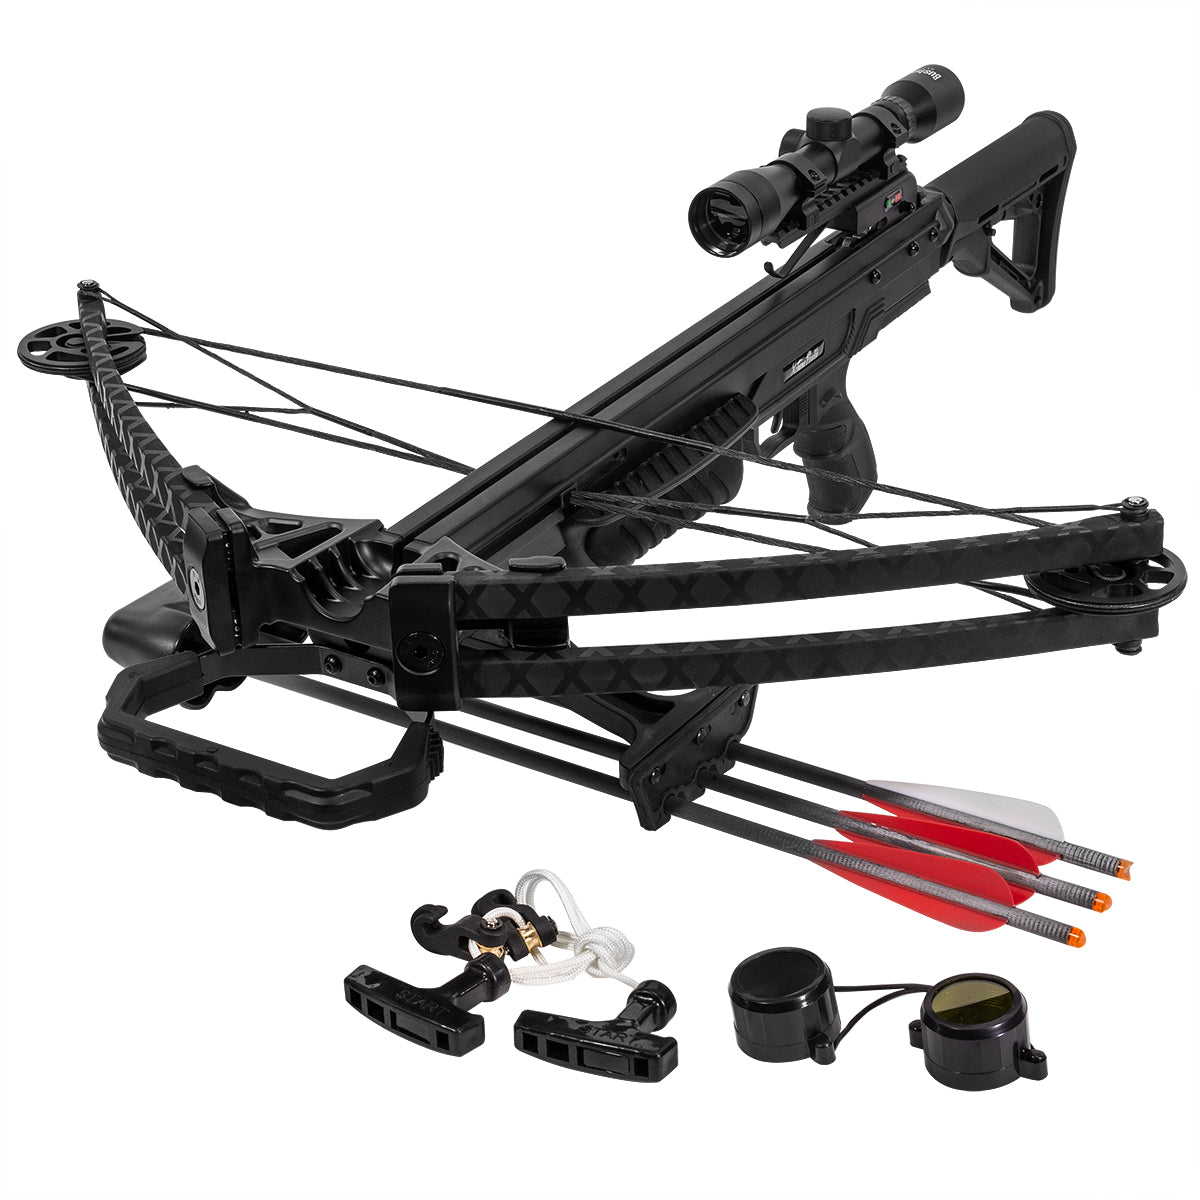 Outdoor Crossbow Archer 165 Lbs 380 fps Hunting w/ Built in Scope